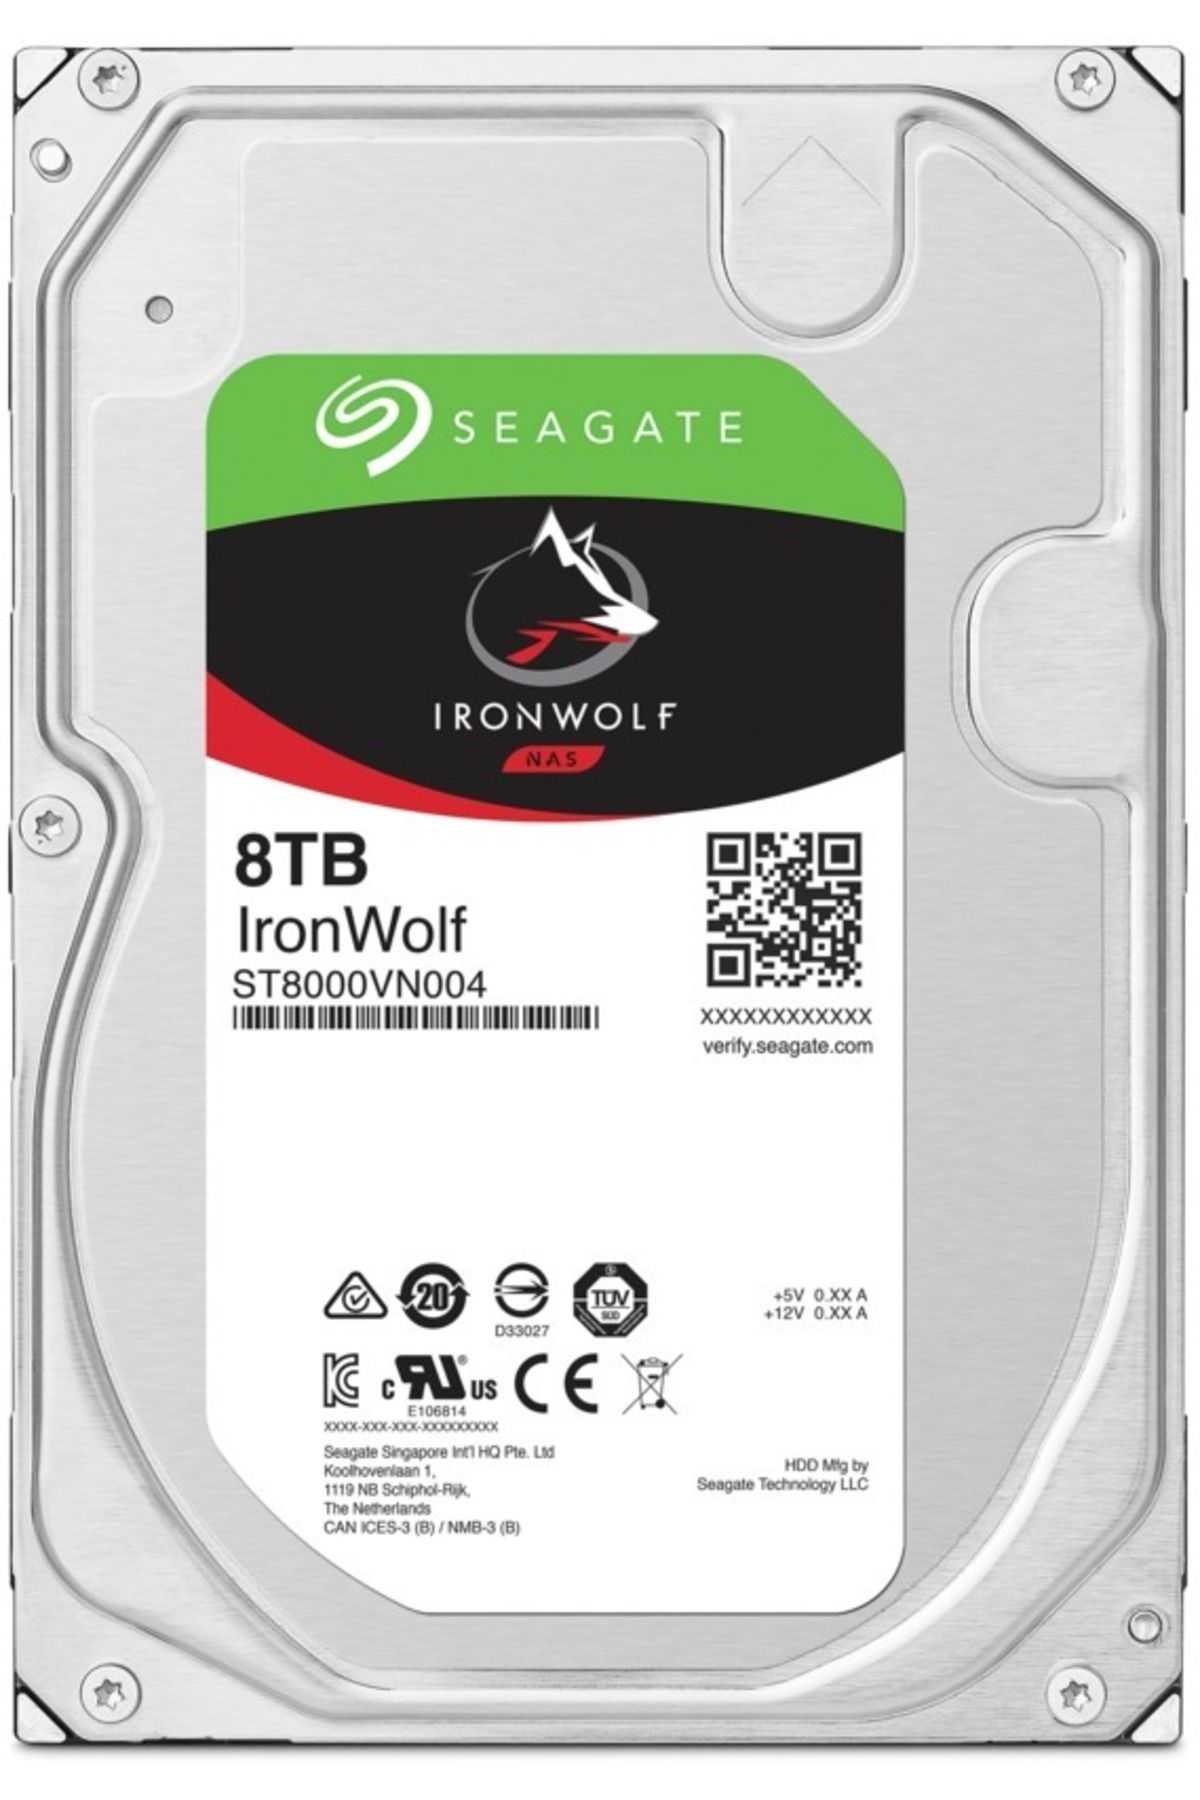 Seagate Ironwolf St8000vn004 8tb 256mb 7200rpm Nas Disk